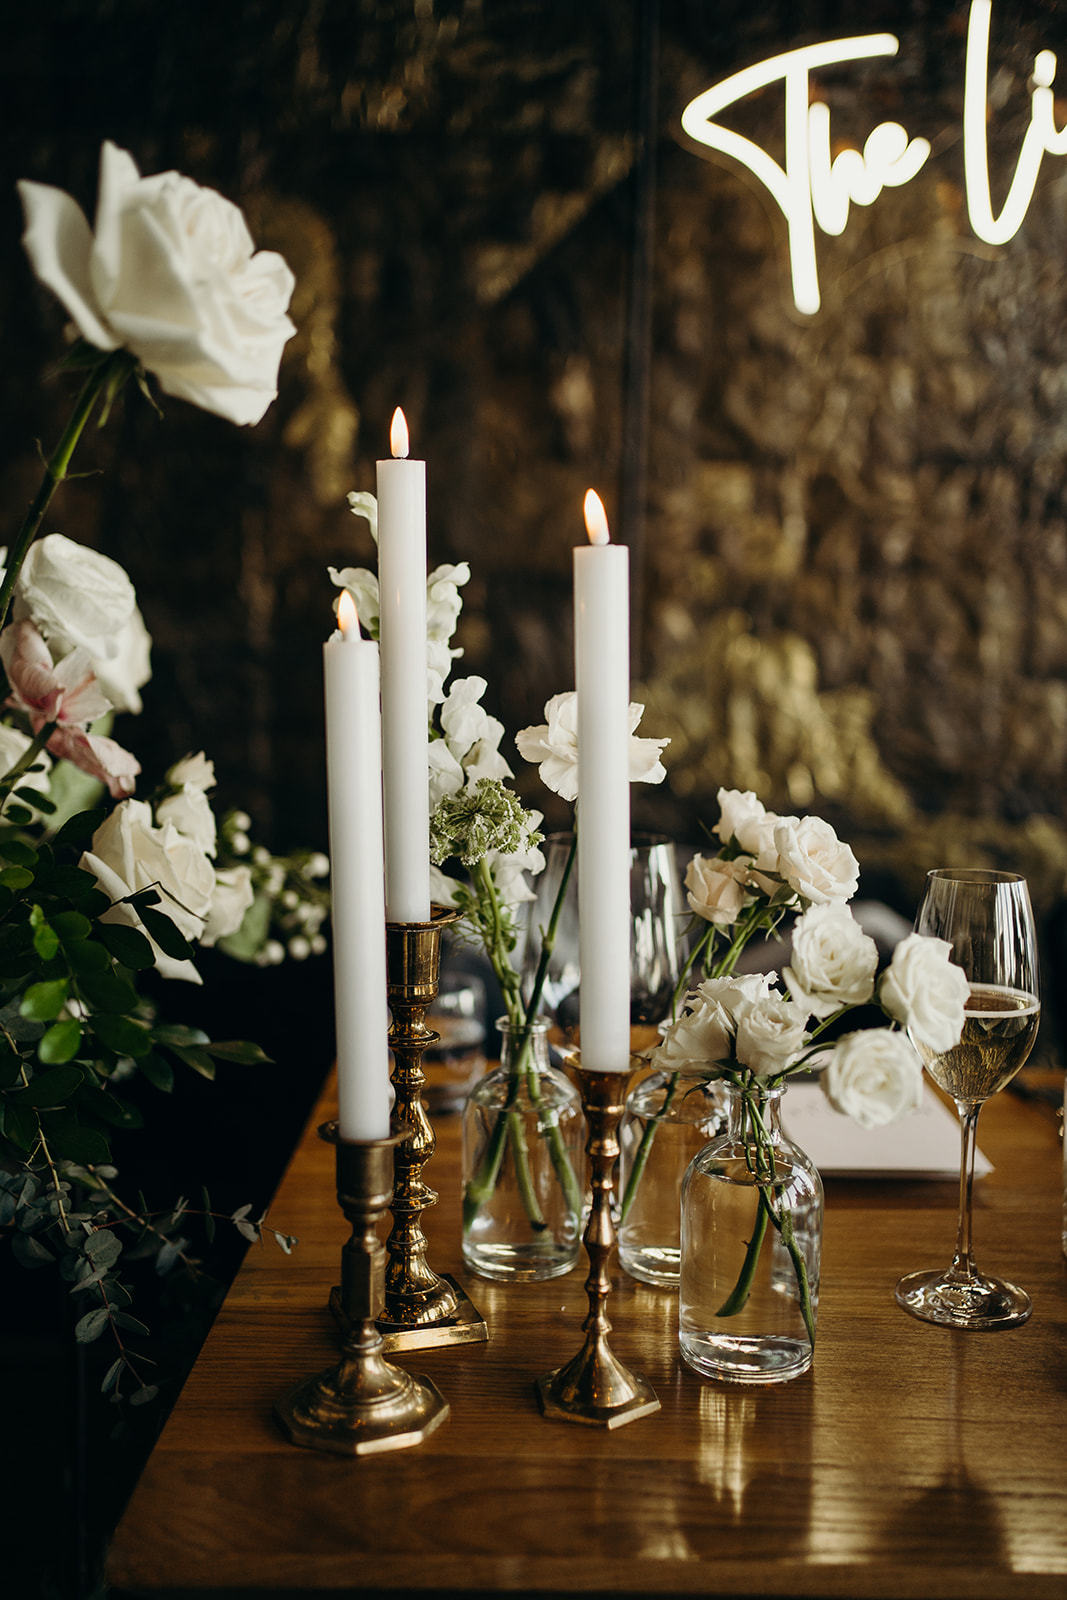 Three lit candles on a table beside flowers in a vase with wine glasses.